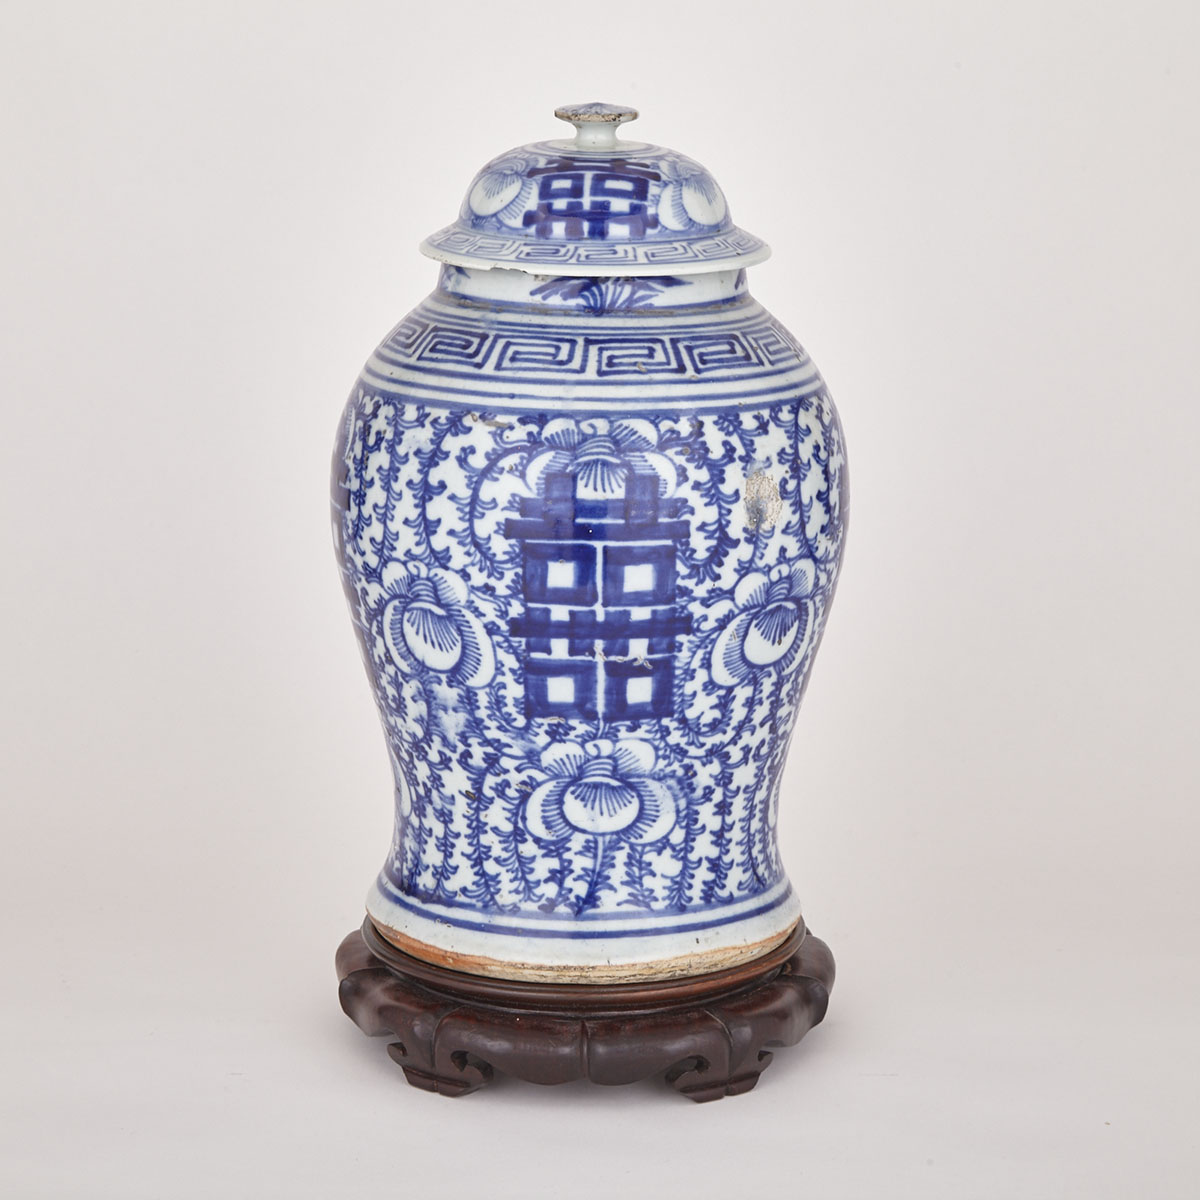 Chinese Blue and White Export Porcelain Ginger Jar, 19th early 20th century